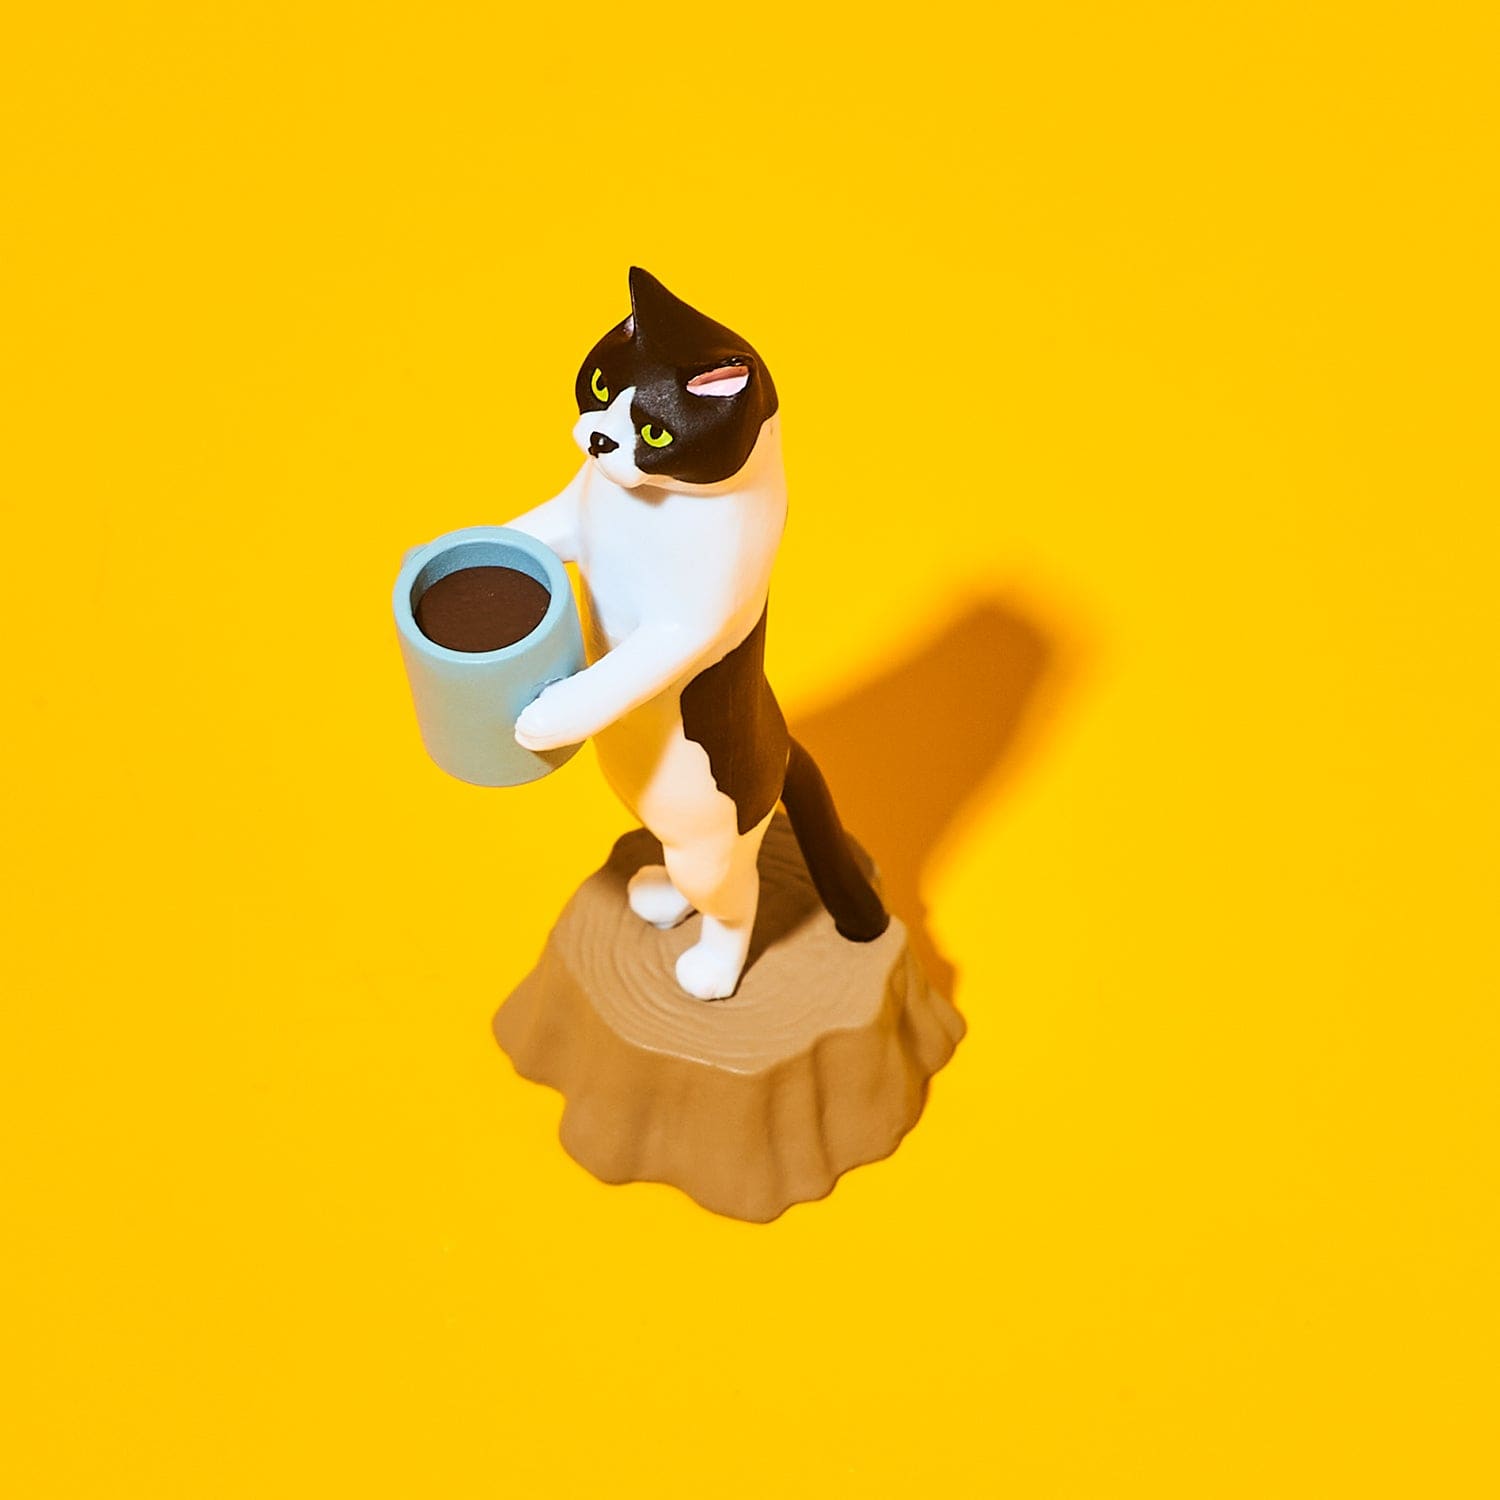 Cat Bakery Blind Box - Lover Gifts Person